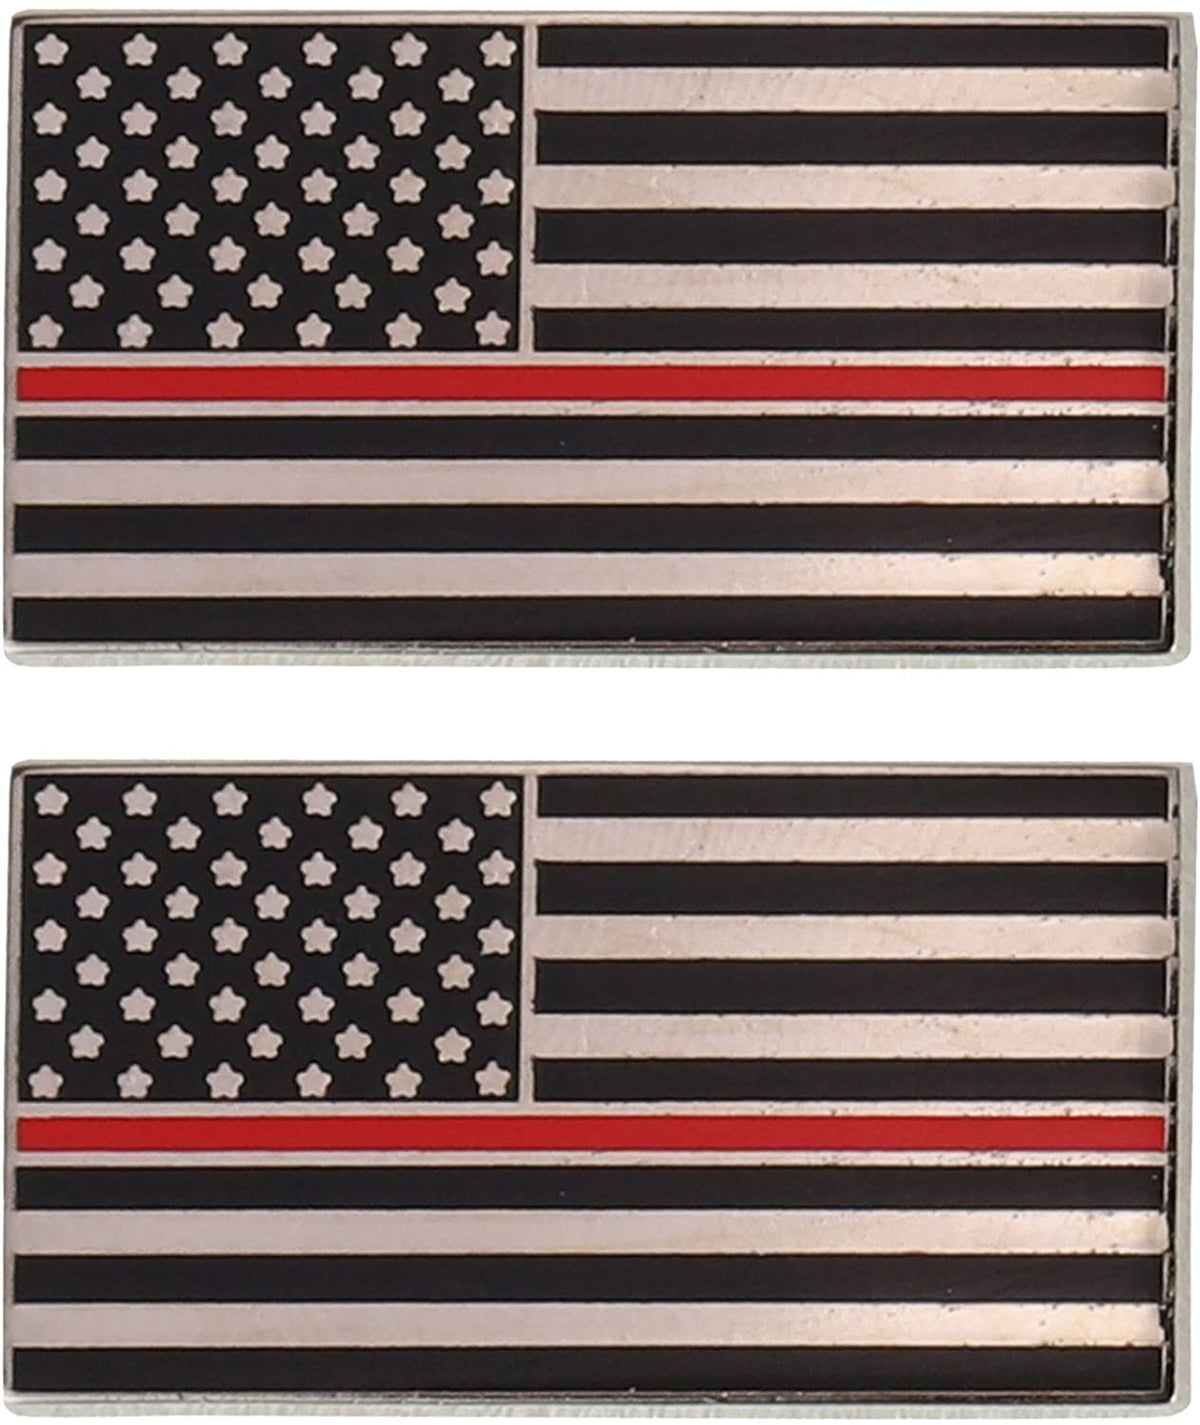 Armycrew Metallic US Thin Red Line American Flag Support Lapel Pins 2 Pack Set